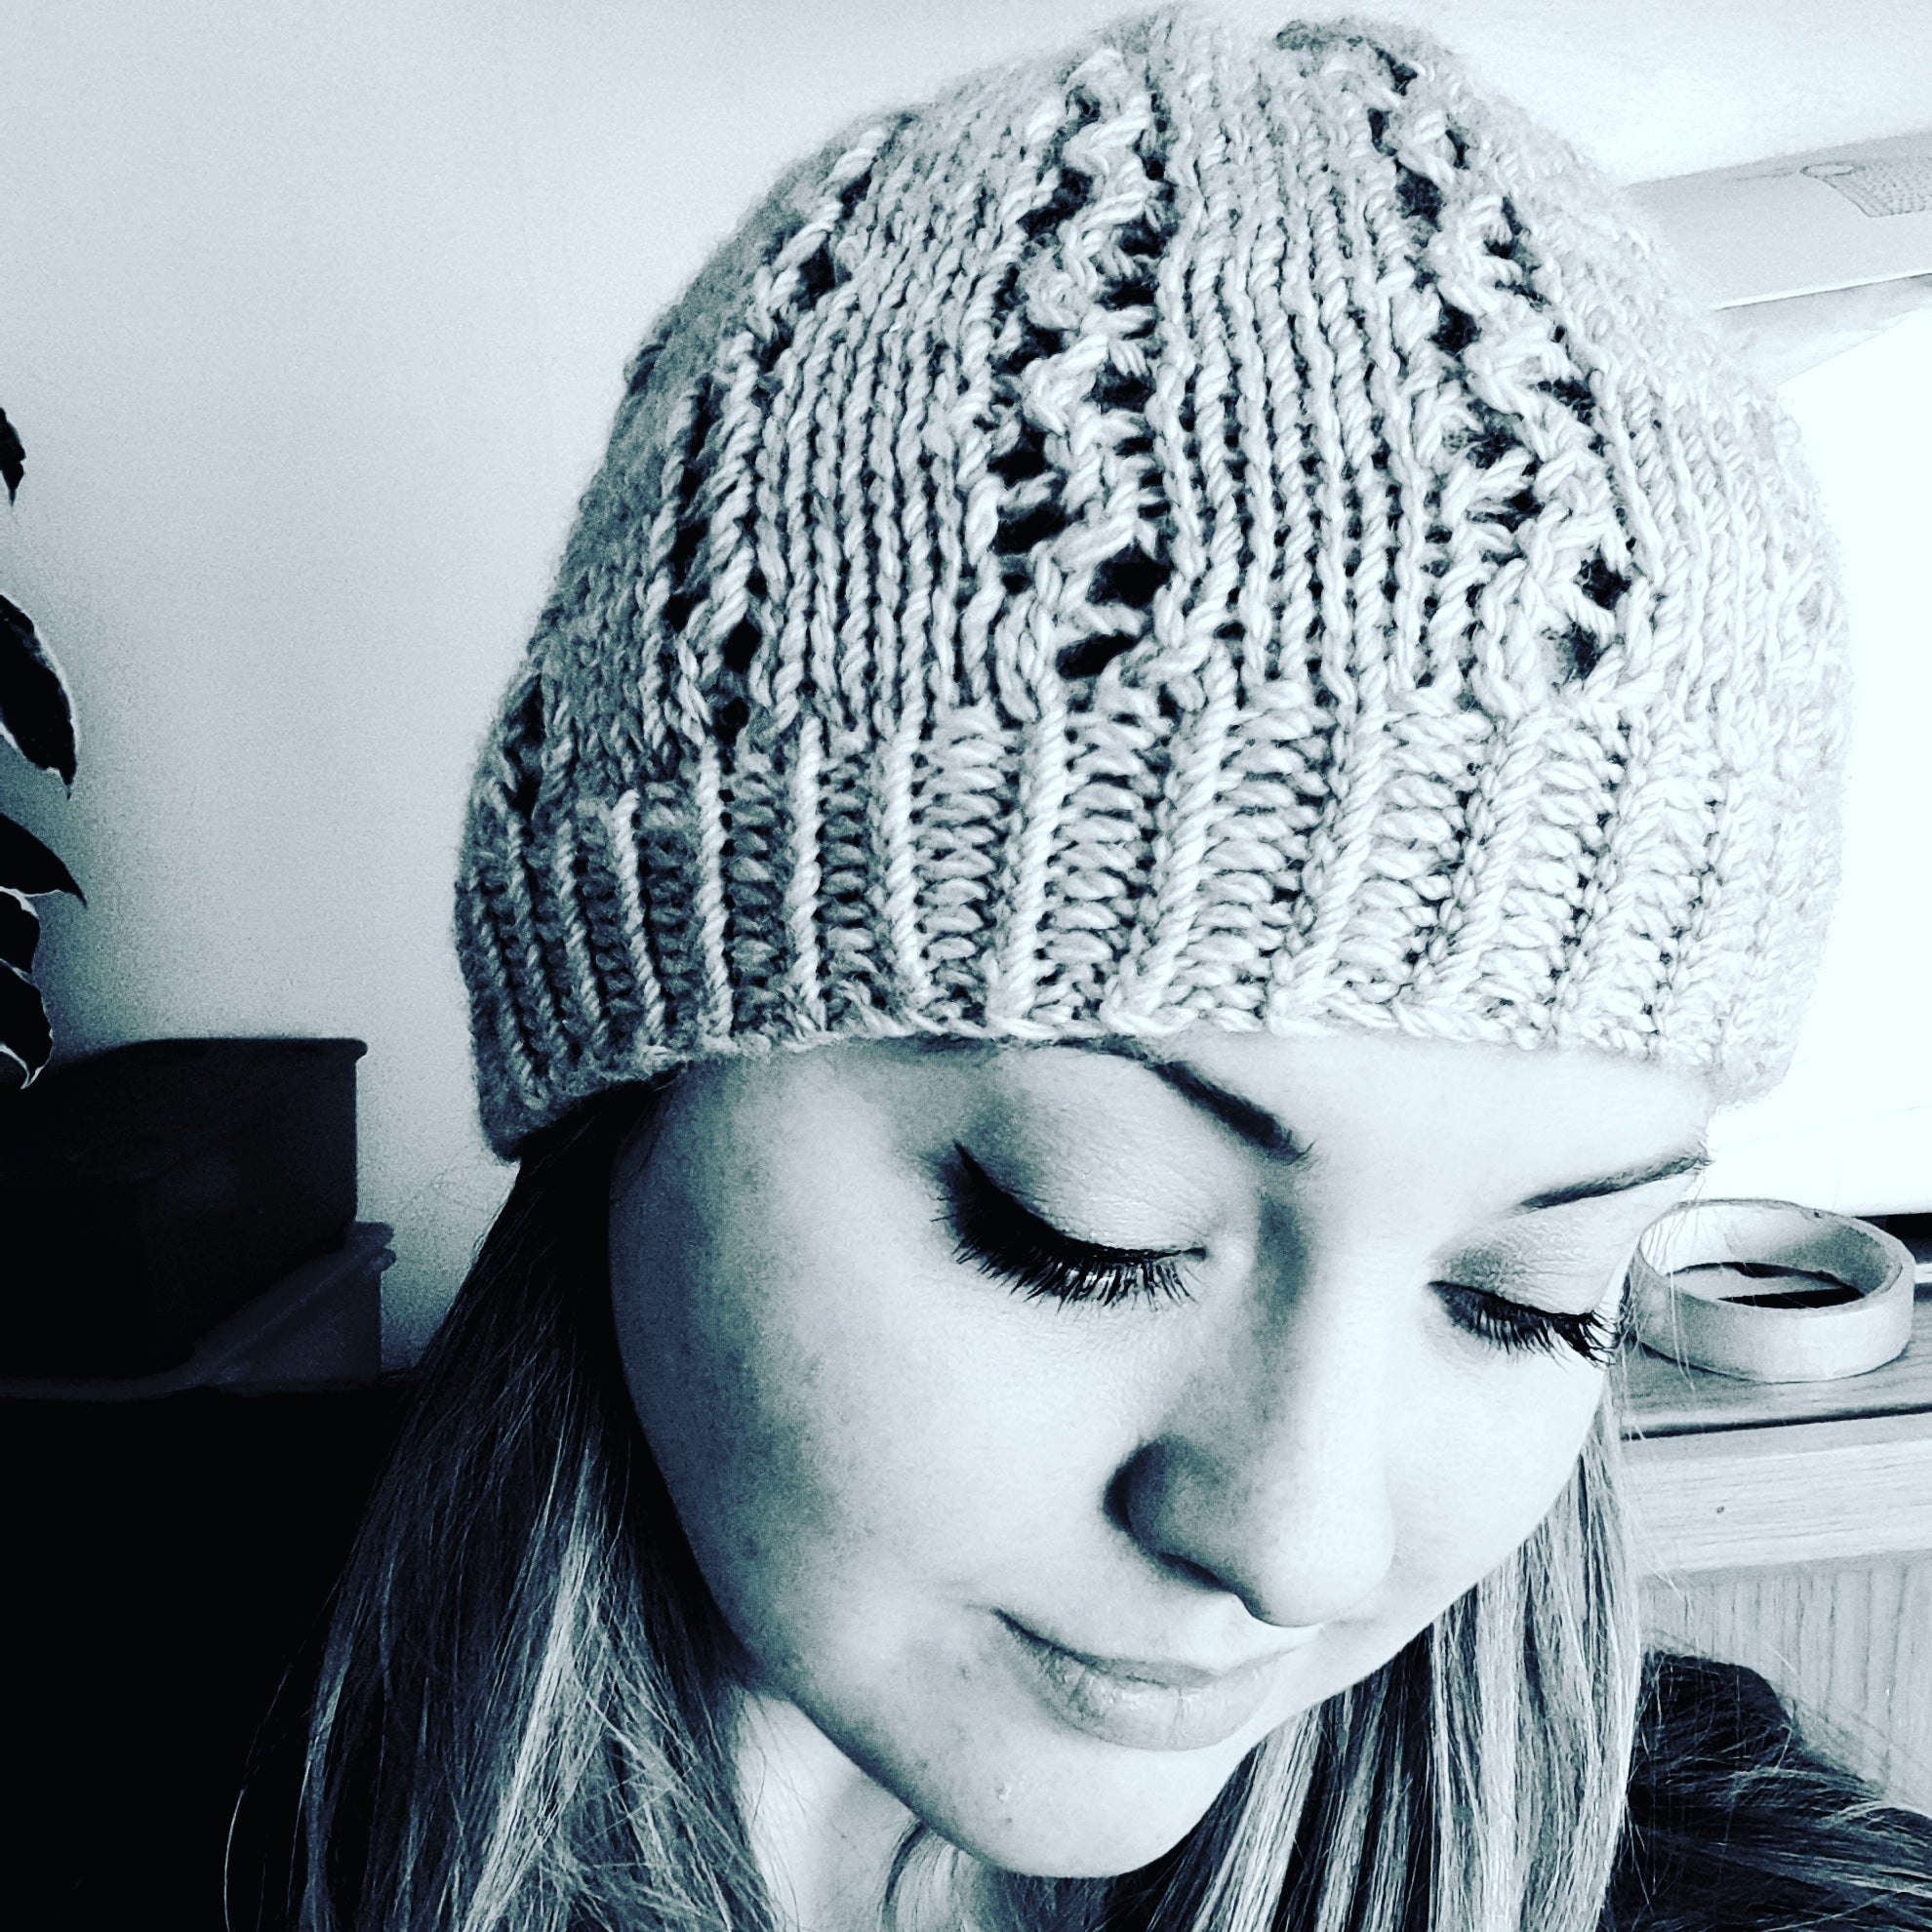 A black and white image of Hanna Gough looking towards the ground. Hanna is wearing a knitted beanie hat with textured lace details running the length of the hat.